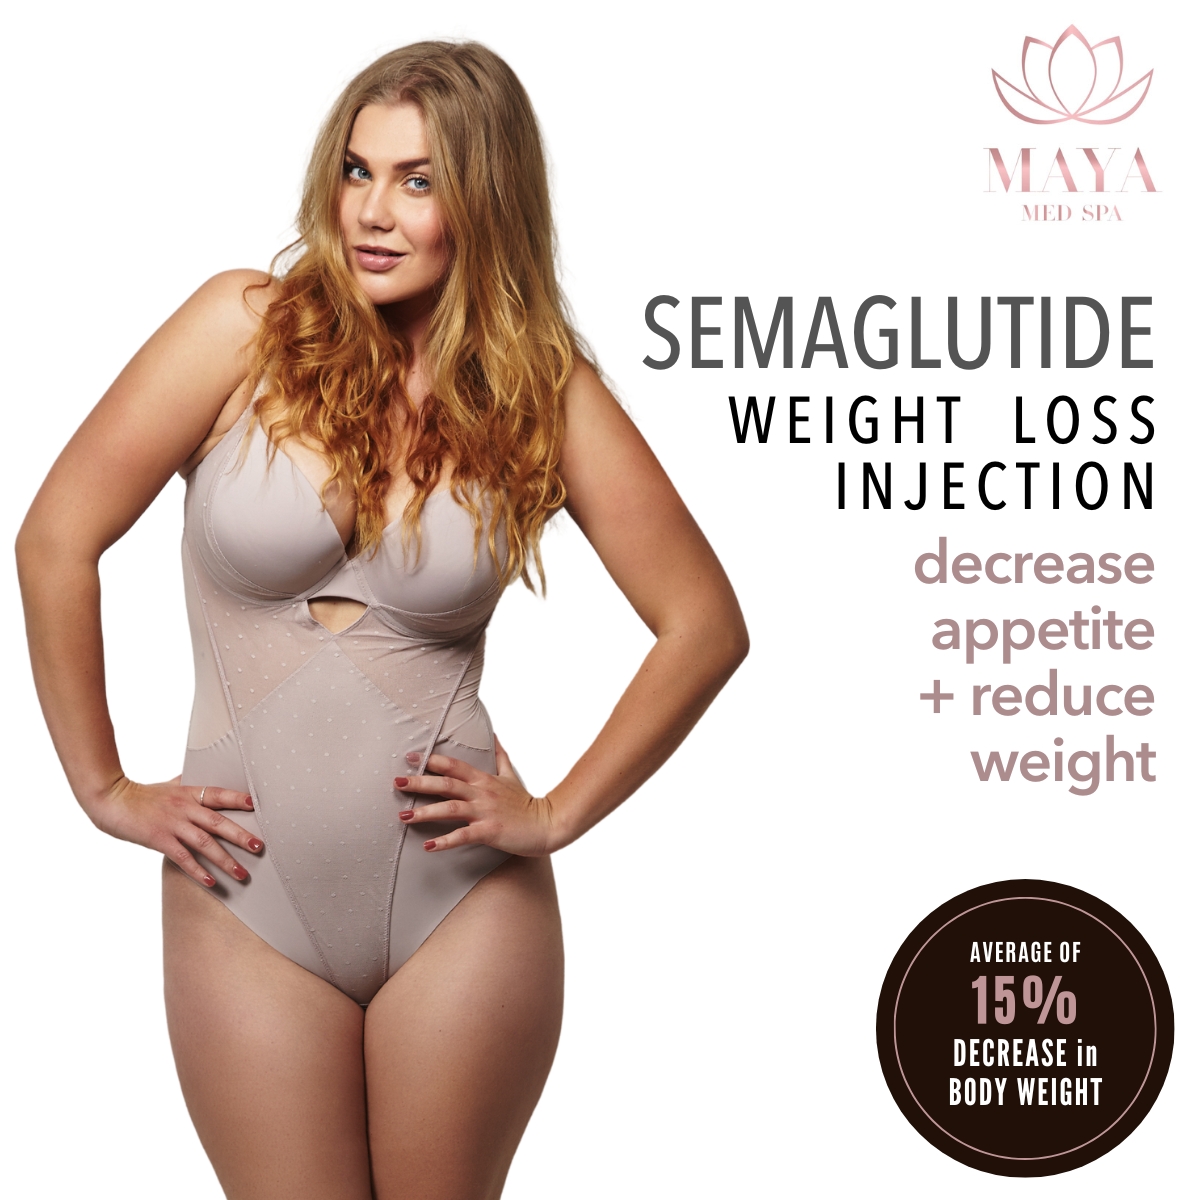 semaglutide-weight-loss-injection-mobile-totowa-nj-maya-med-spa